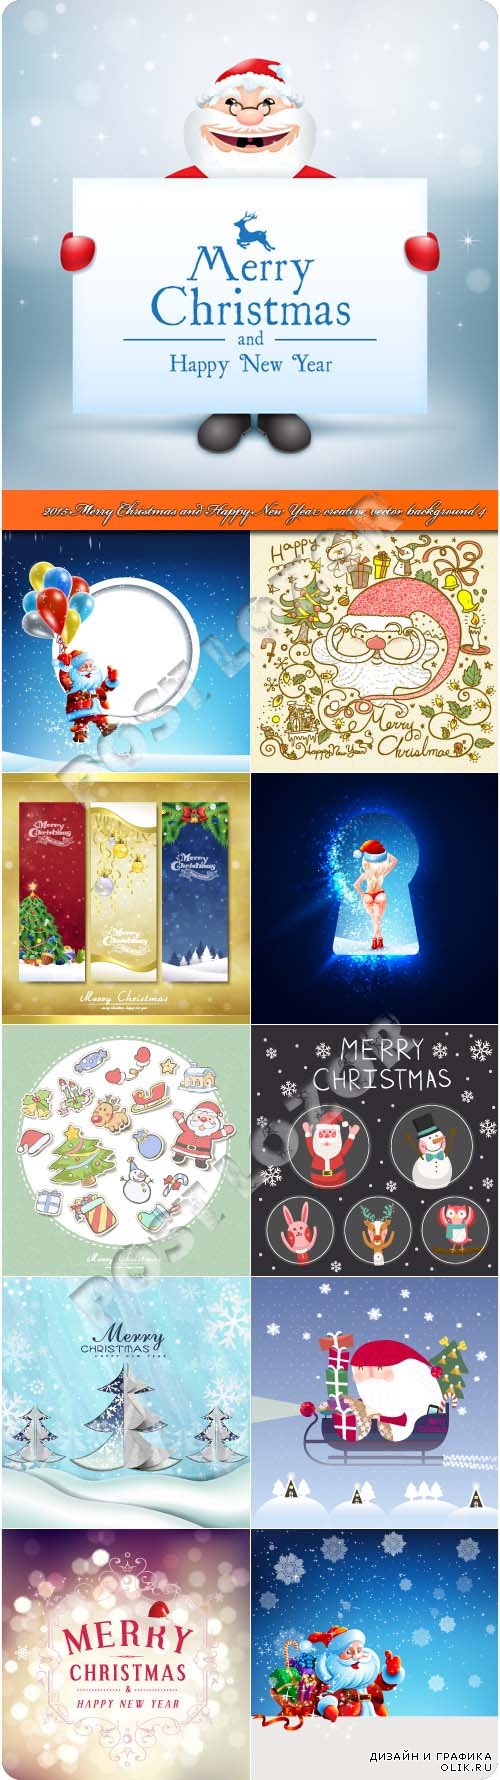 2015 Merry Christmas and Happy New Year creative vector background 4